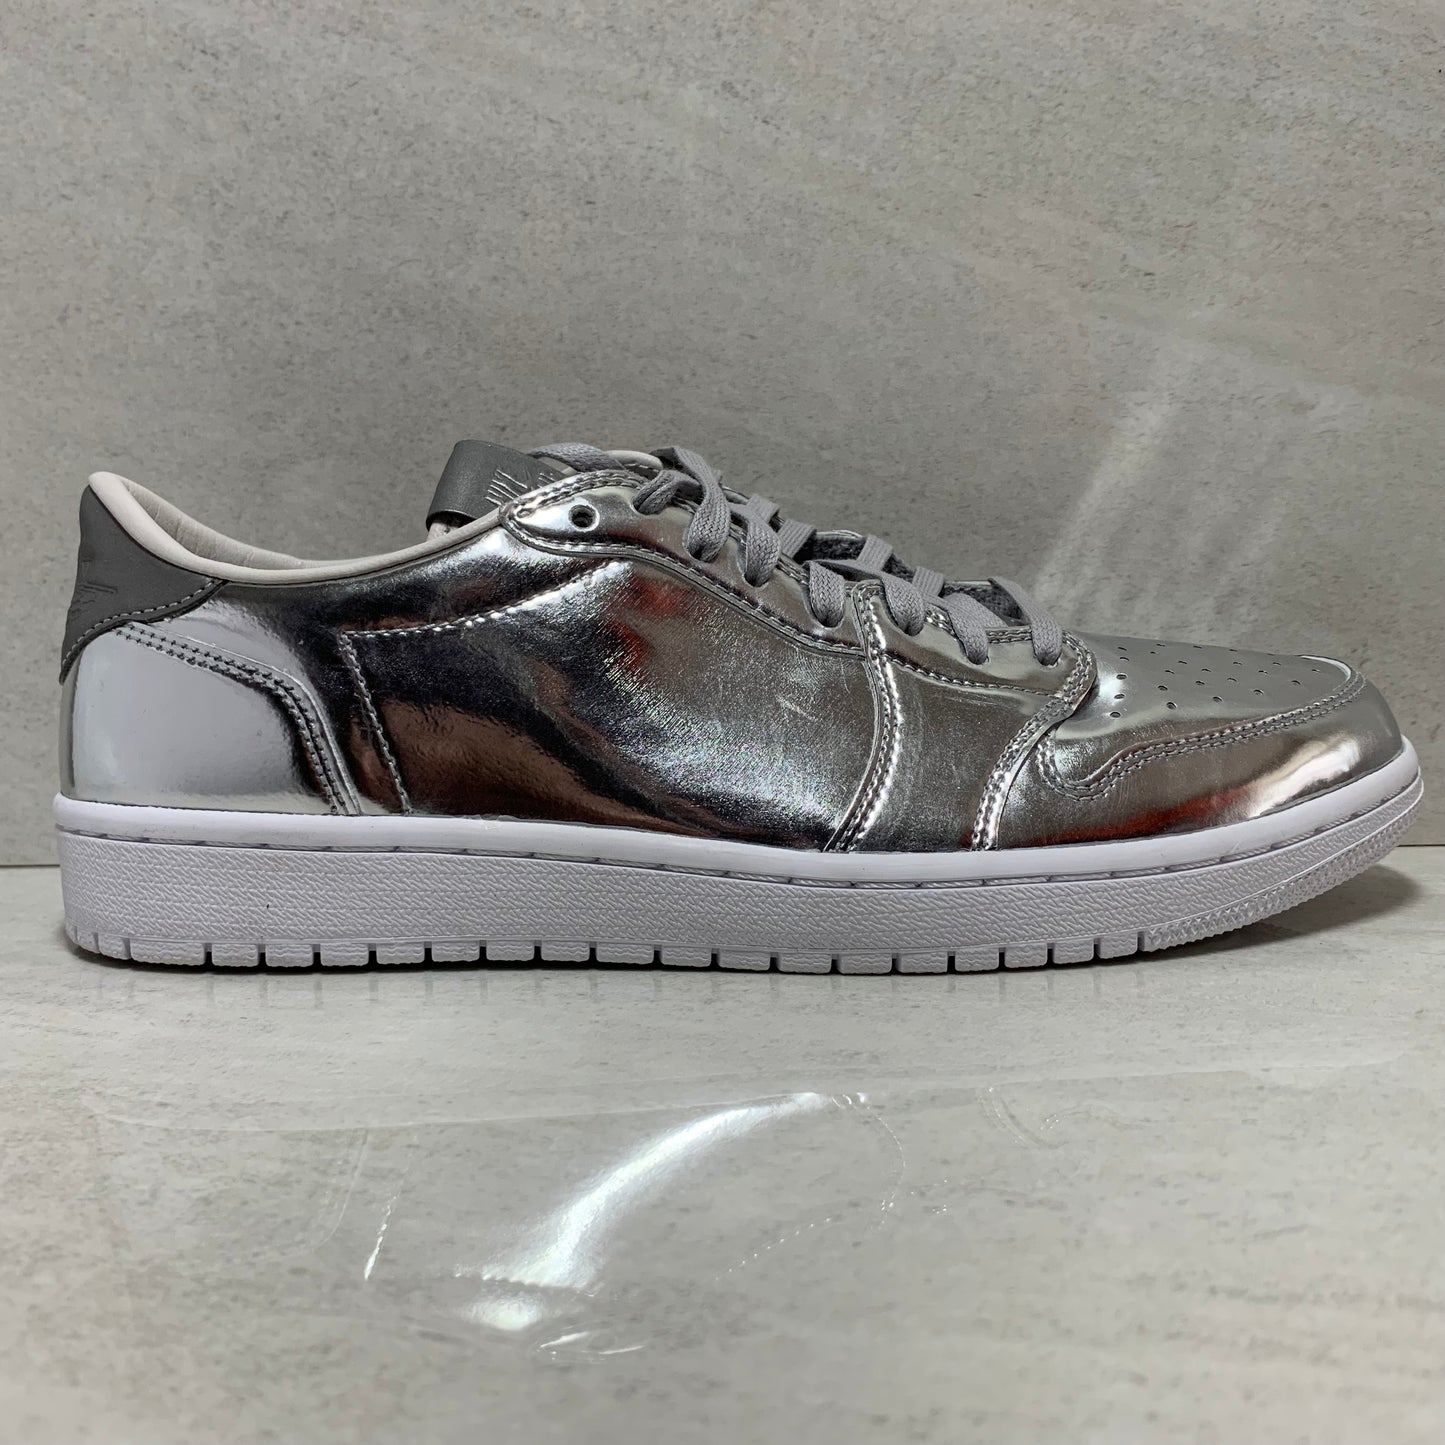 NIKE AIR JORDAN 1 I LOW OG SWOSHLESS PINACLE TAILLE 10 ARGENT 852549 003